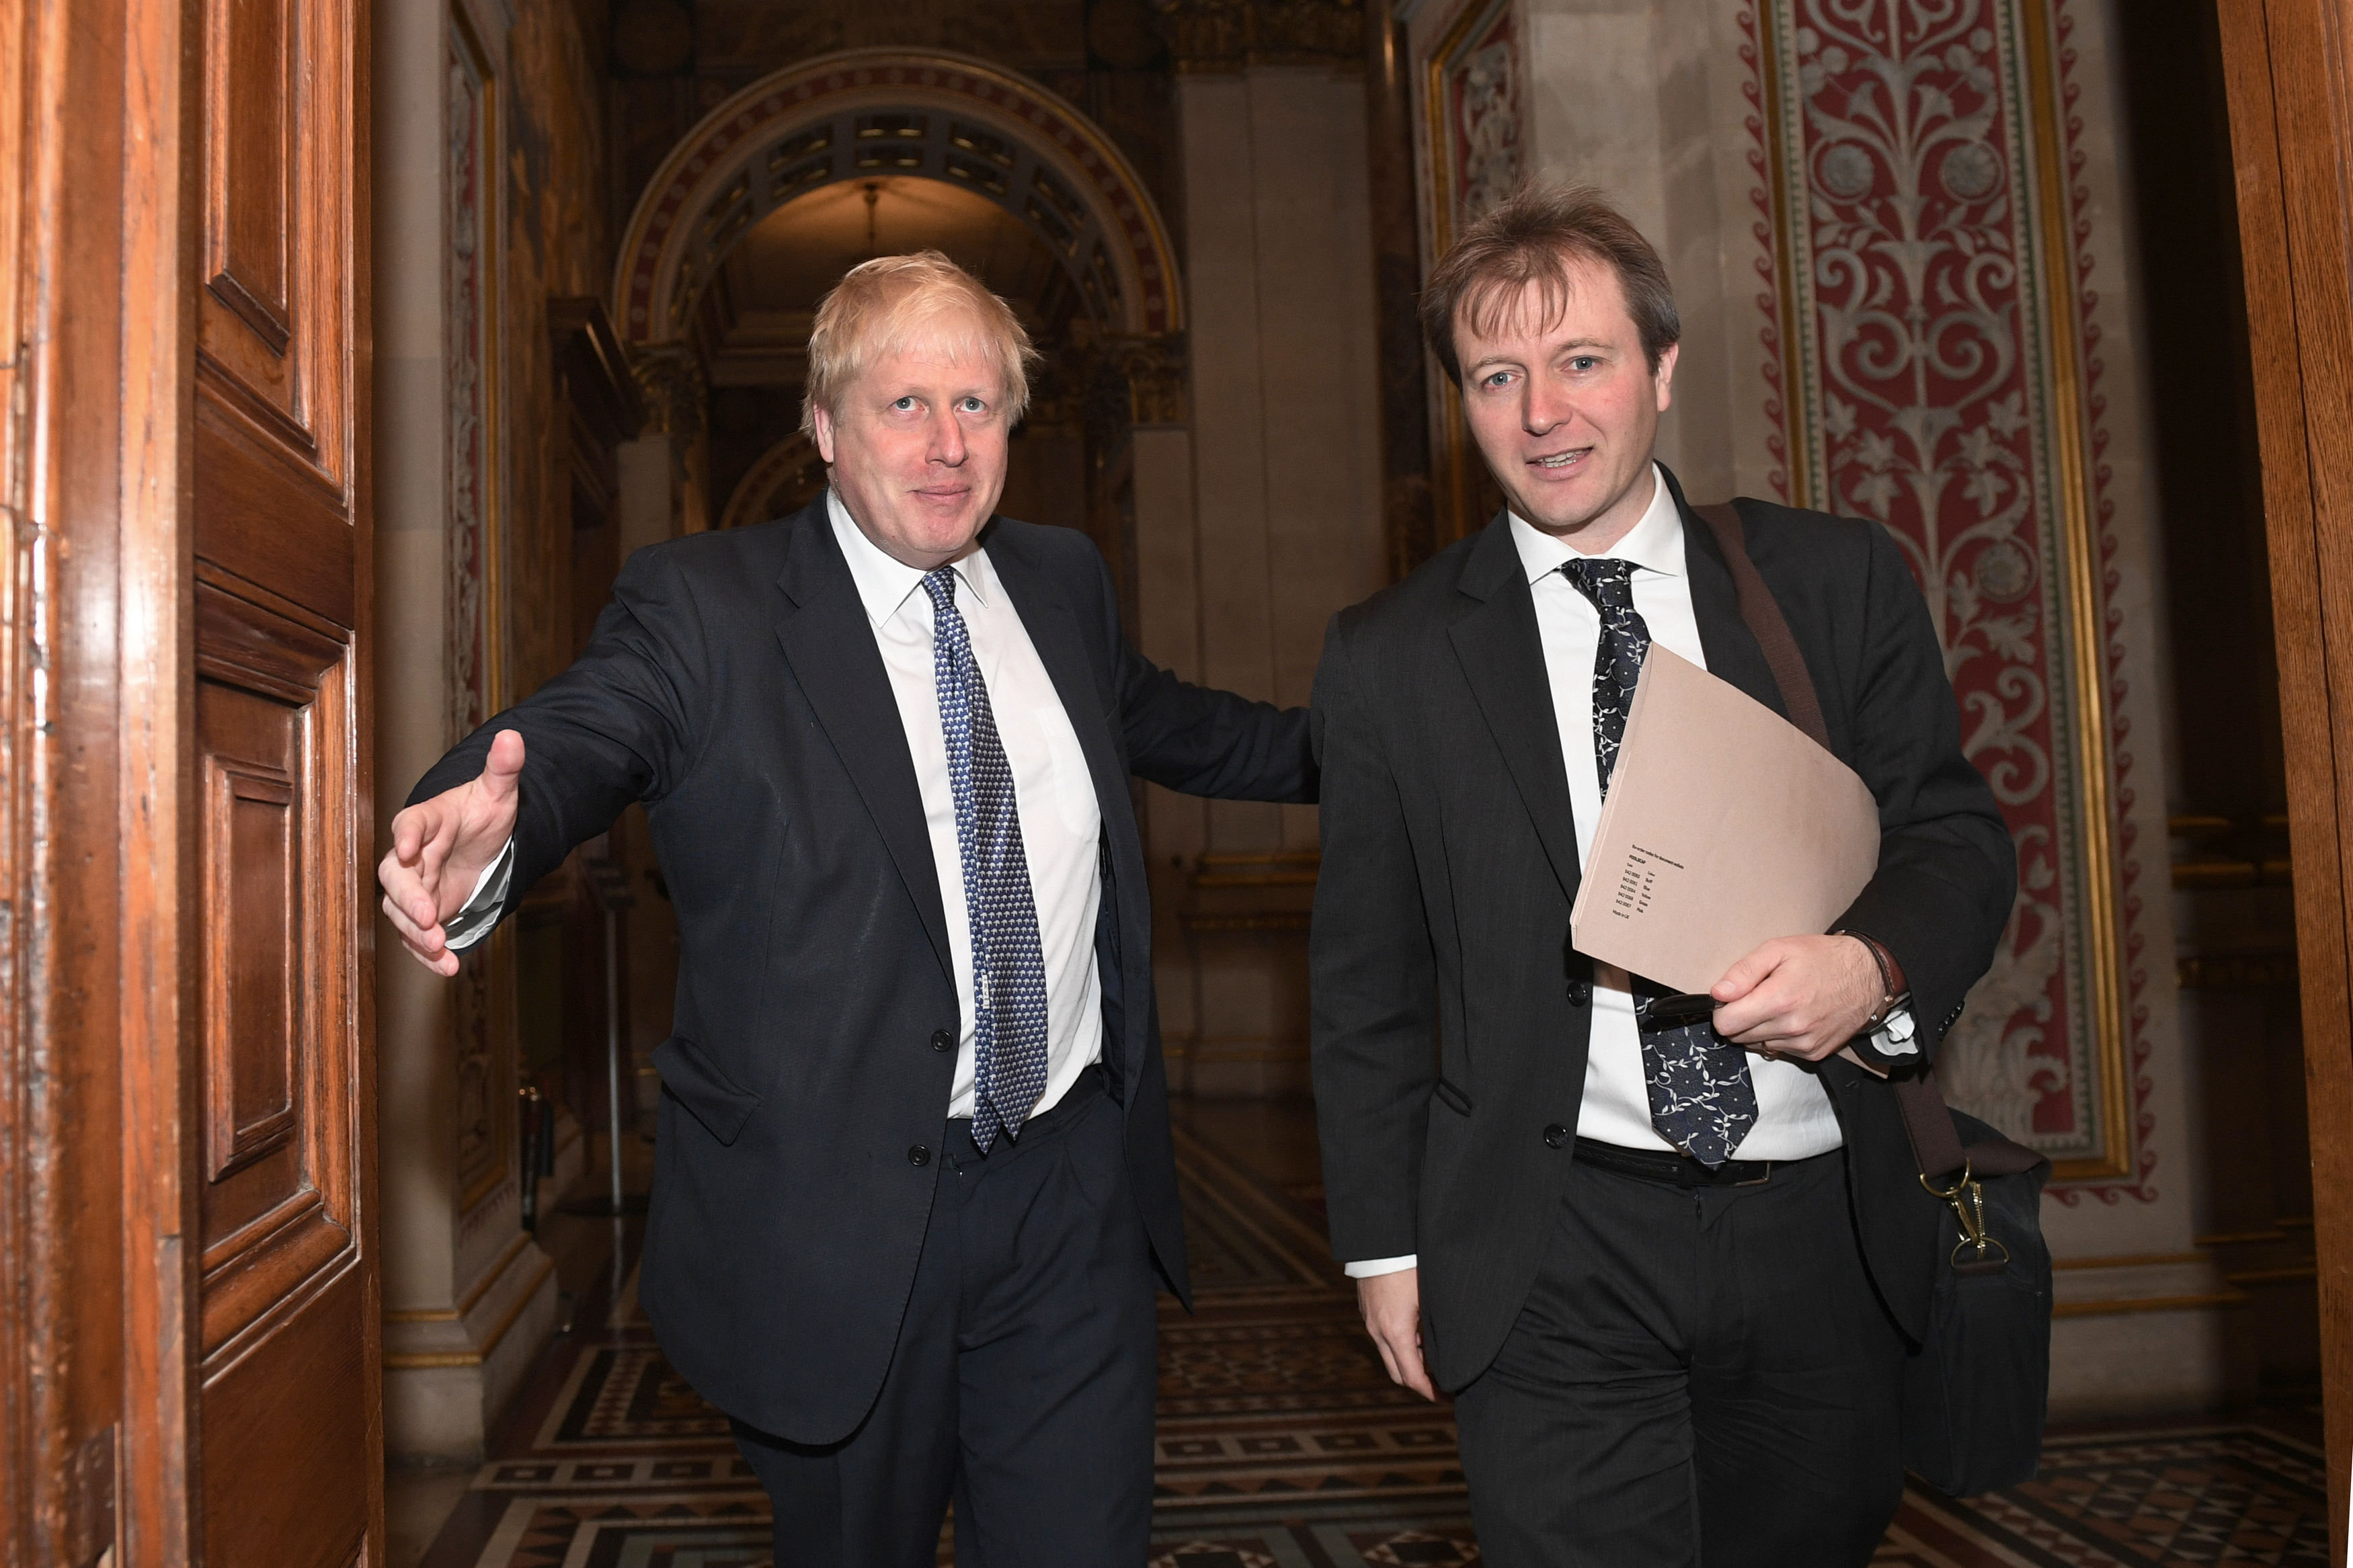 Boris Johnson met Nazanin Zaghari-Ratcliffe's husband Richard Ratcliffe on November 15, after he mistakenly said she was in the country to train journalists